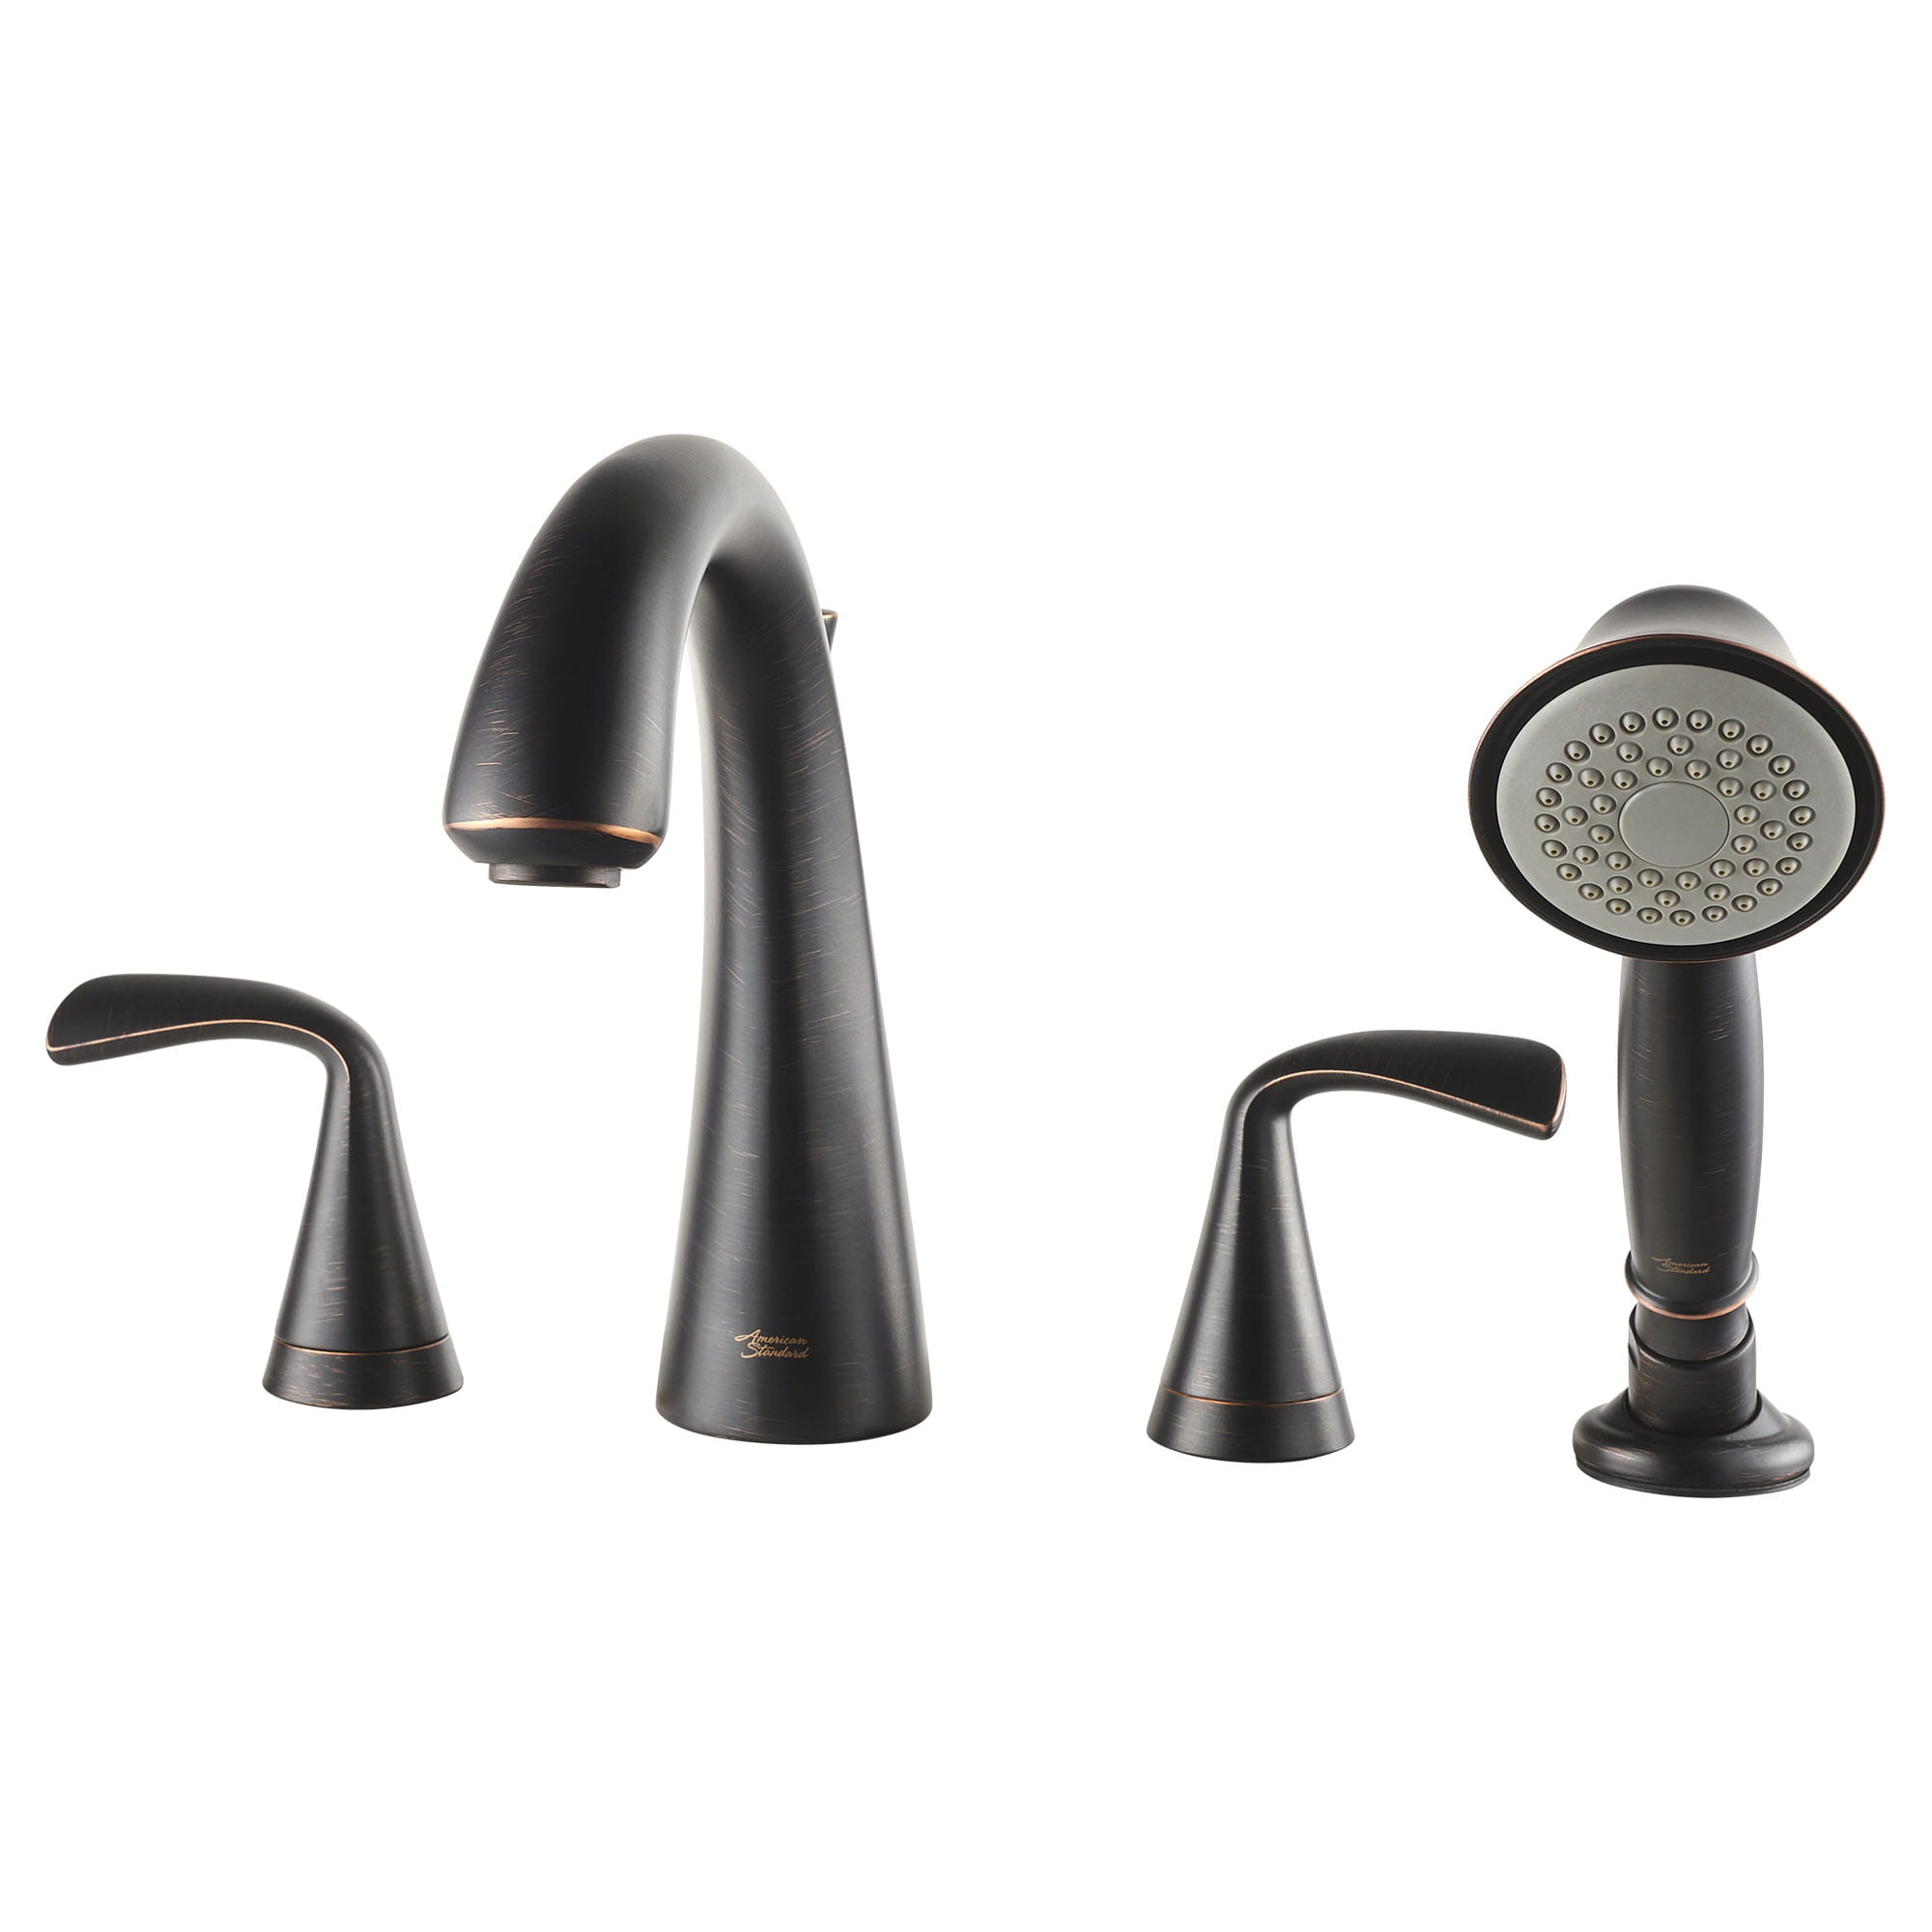 Fluent Bathtub Faucet With  Lever Handles and Personal Shower for Flash Rough In Valve LEGACY BRONZE